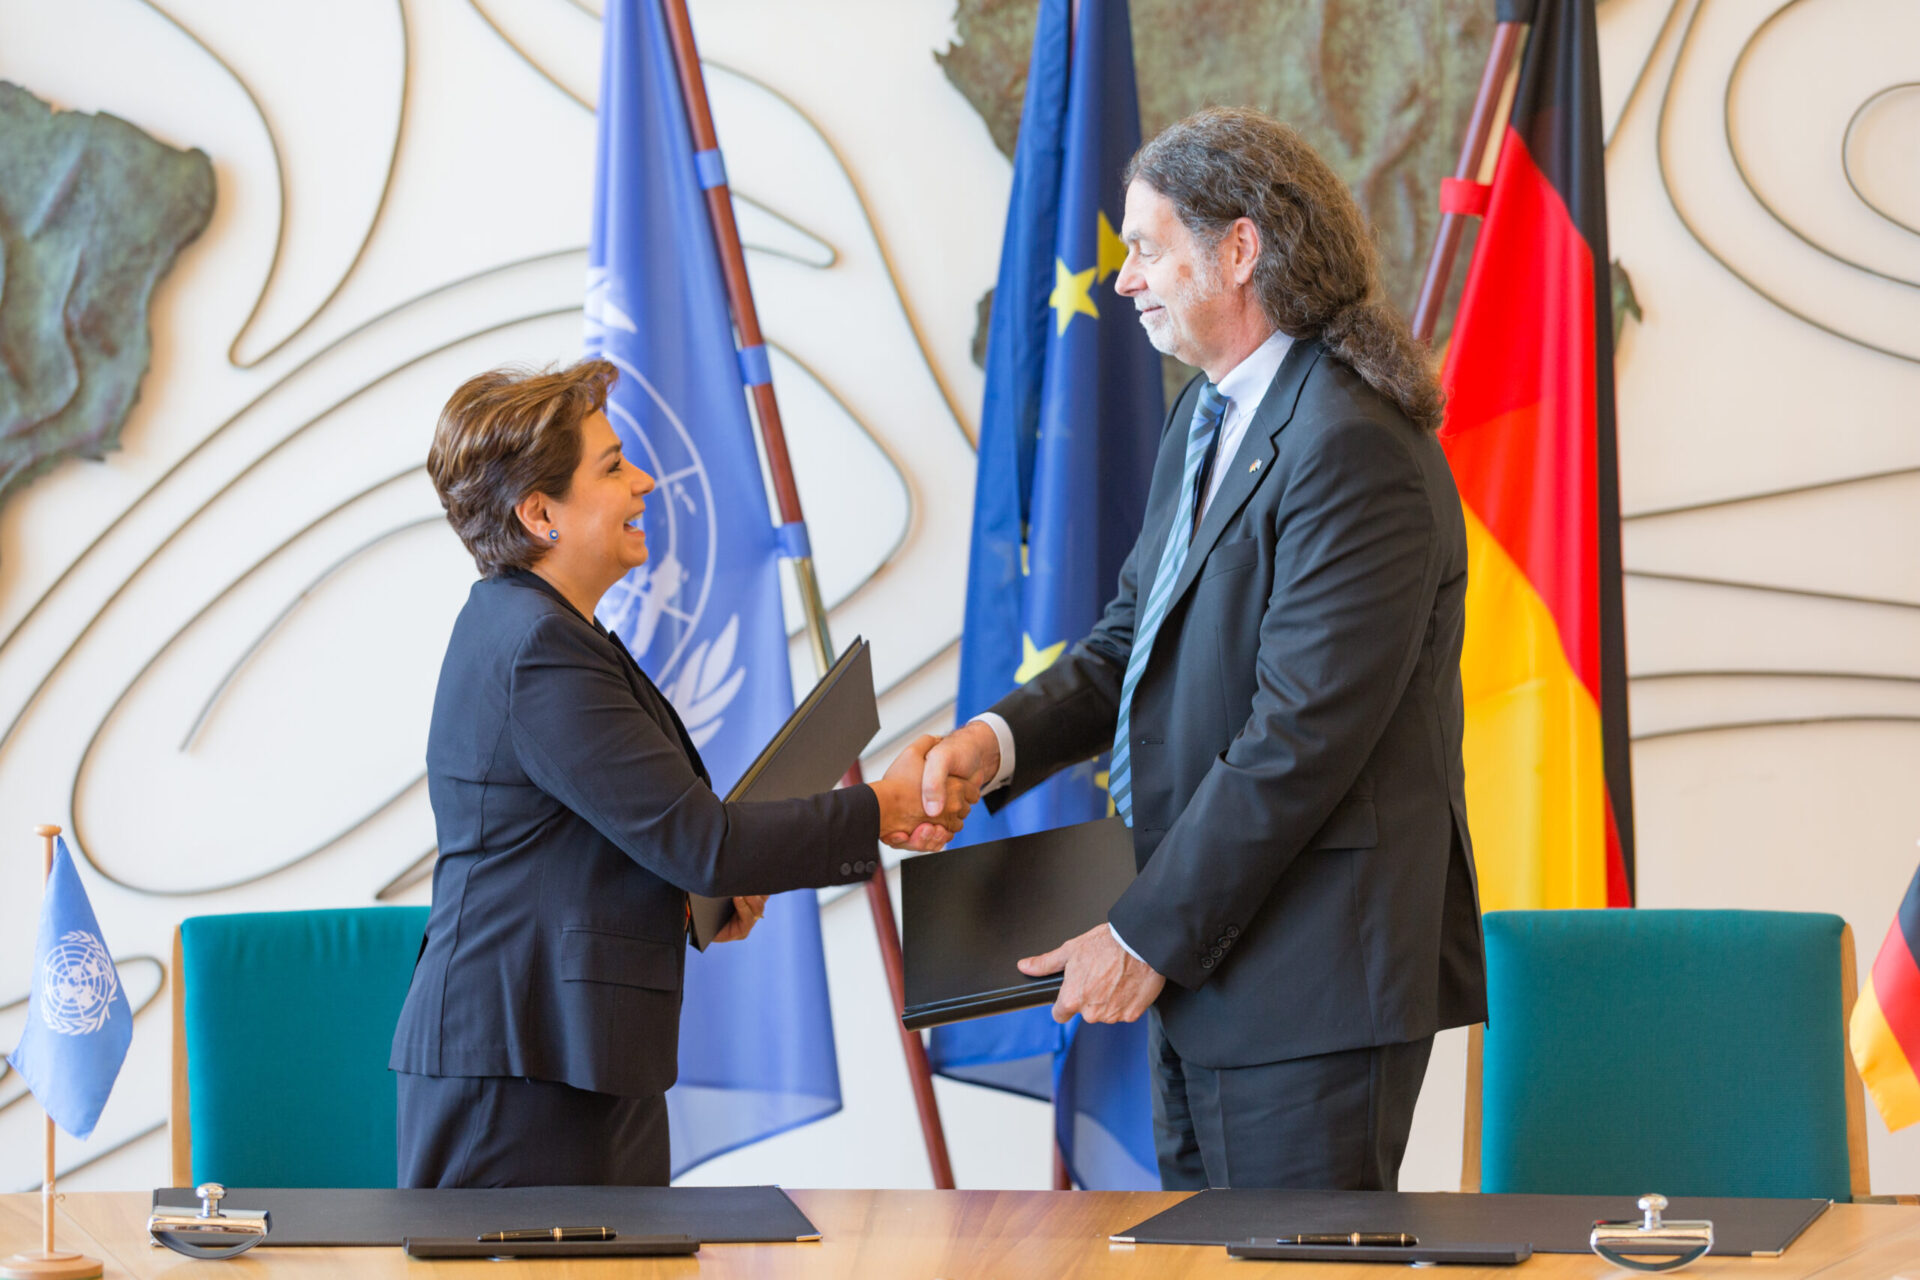 UNFCCC Executive Secretary Patricia Espinosa signs the COP23 hosting agreement with German State Secretary.